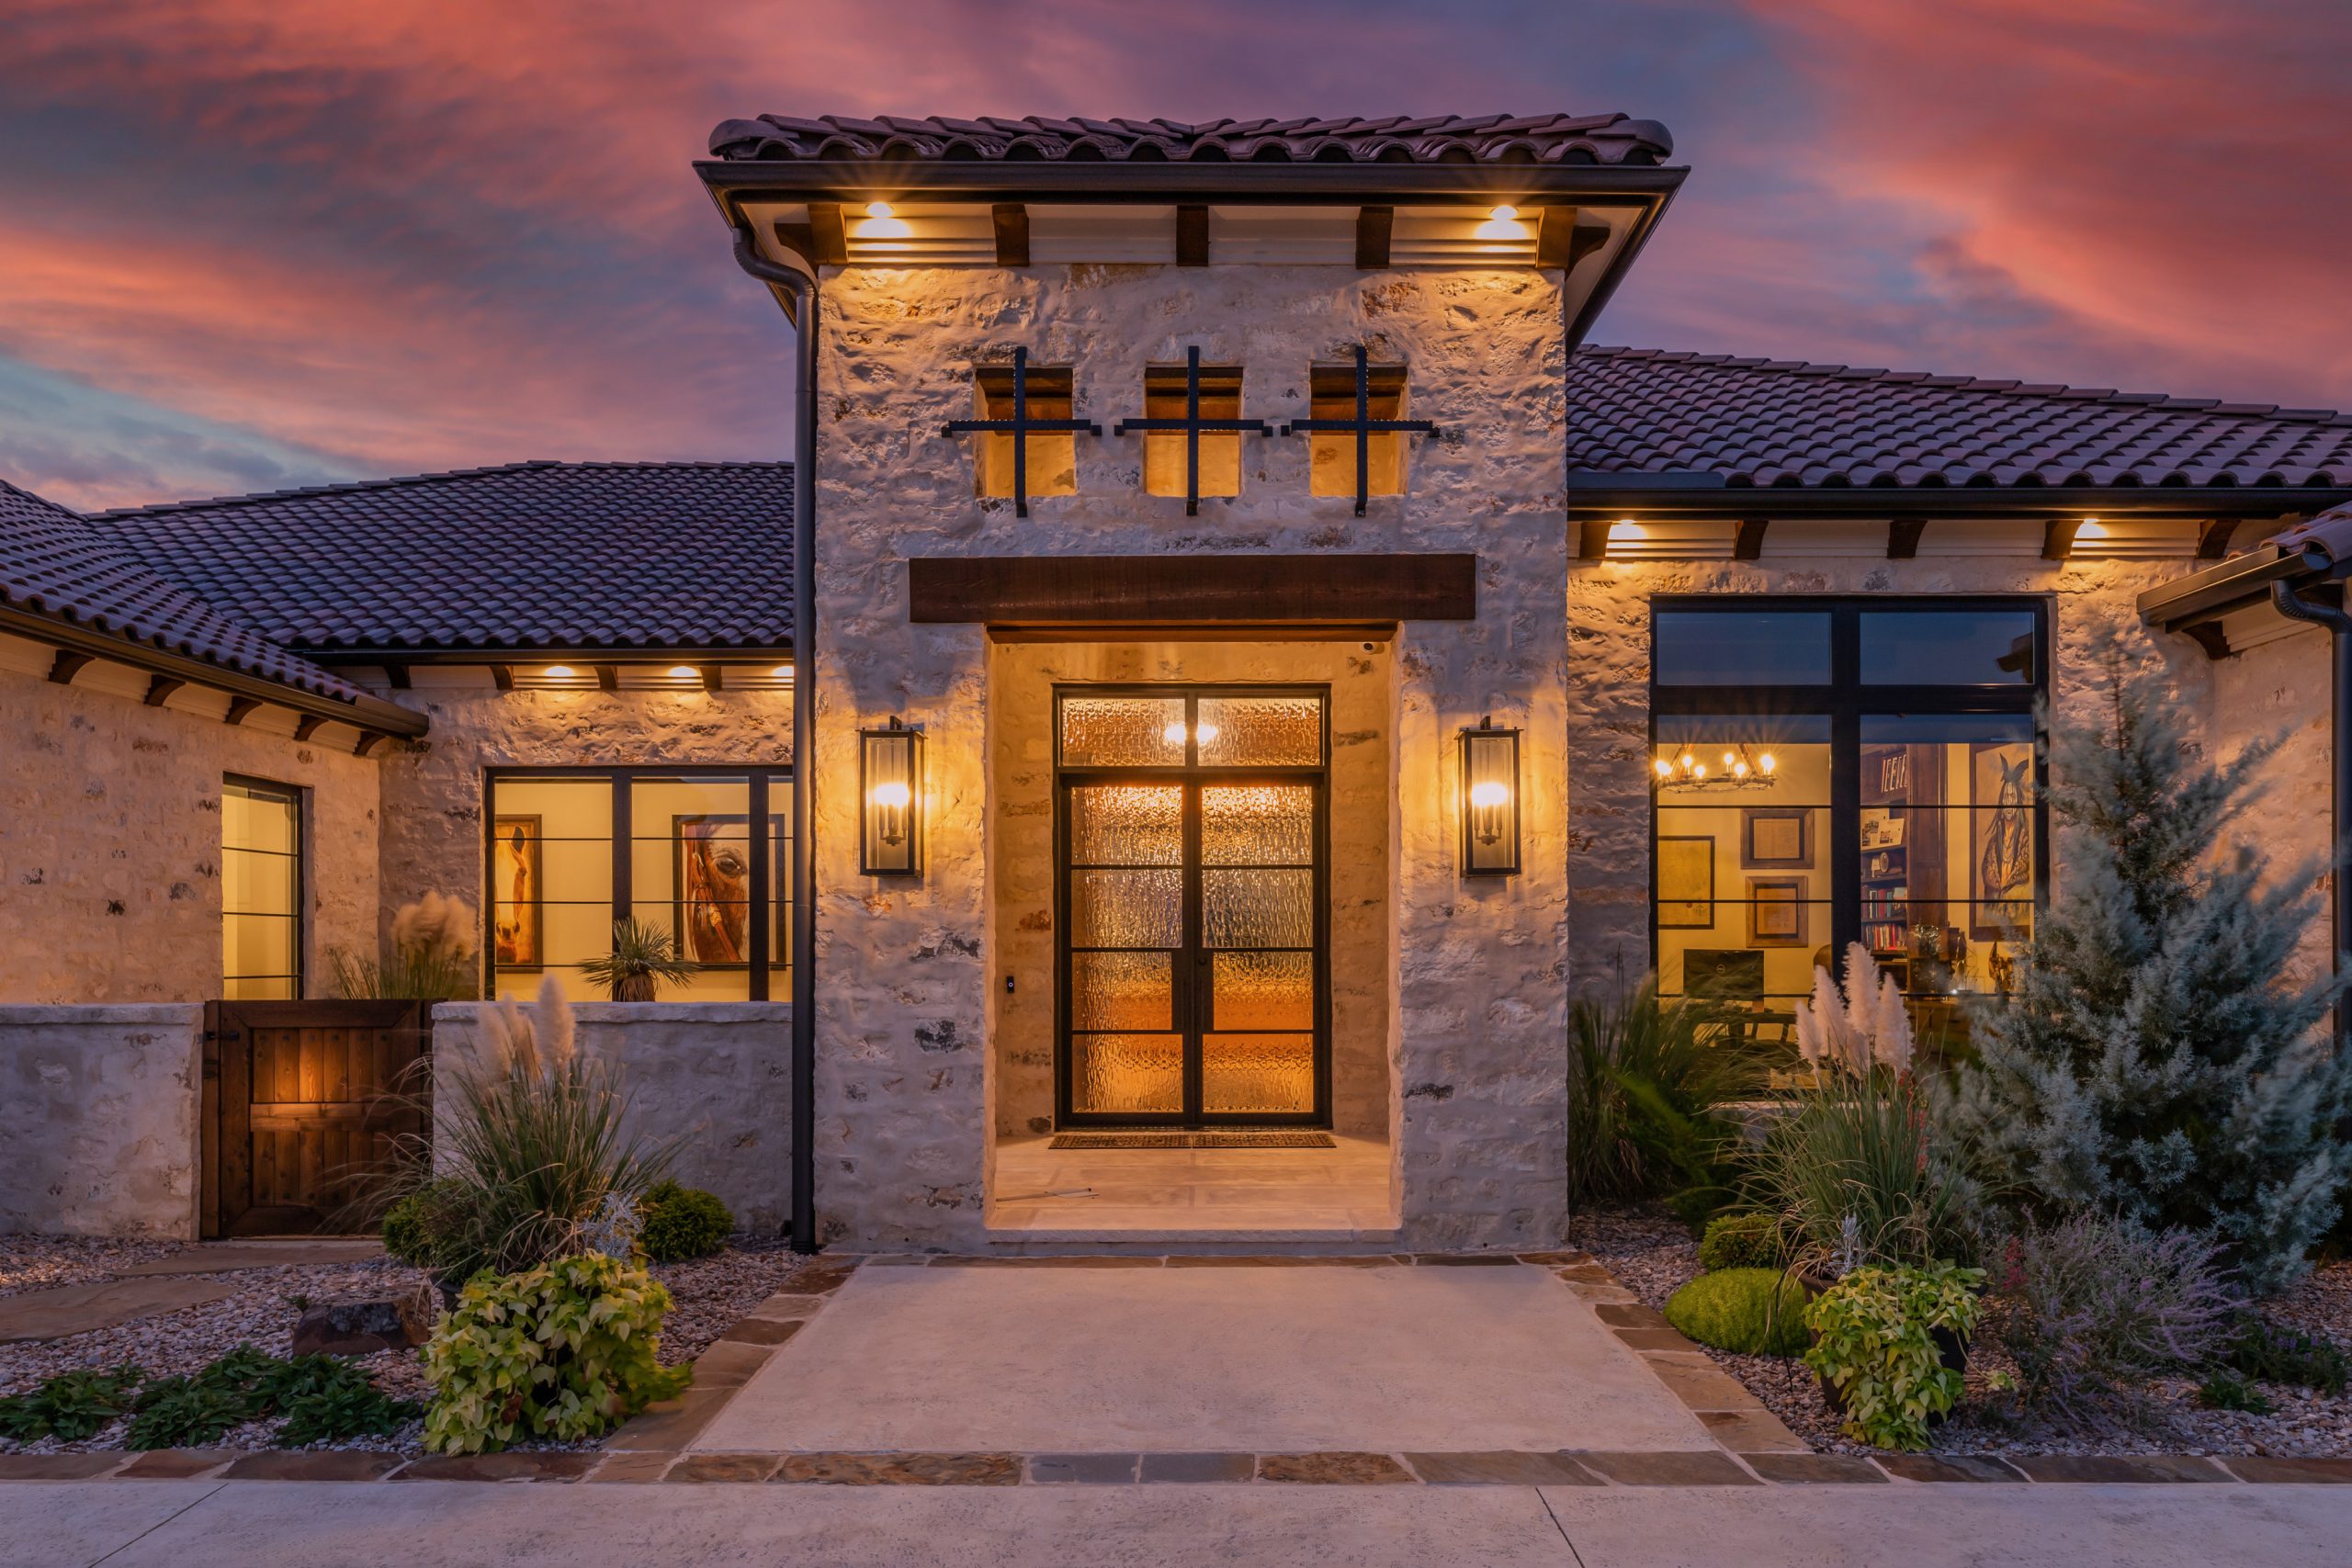 twilight image of a stone residential home lit up with a warm glow